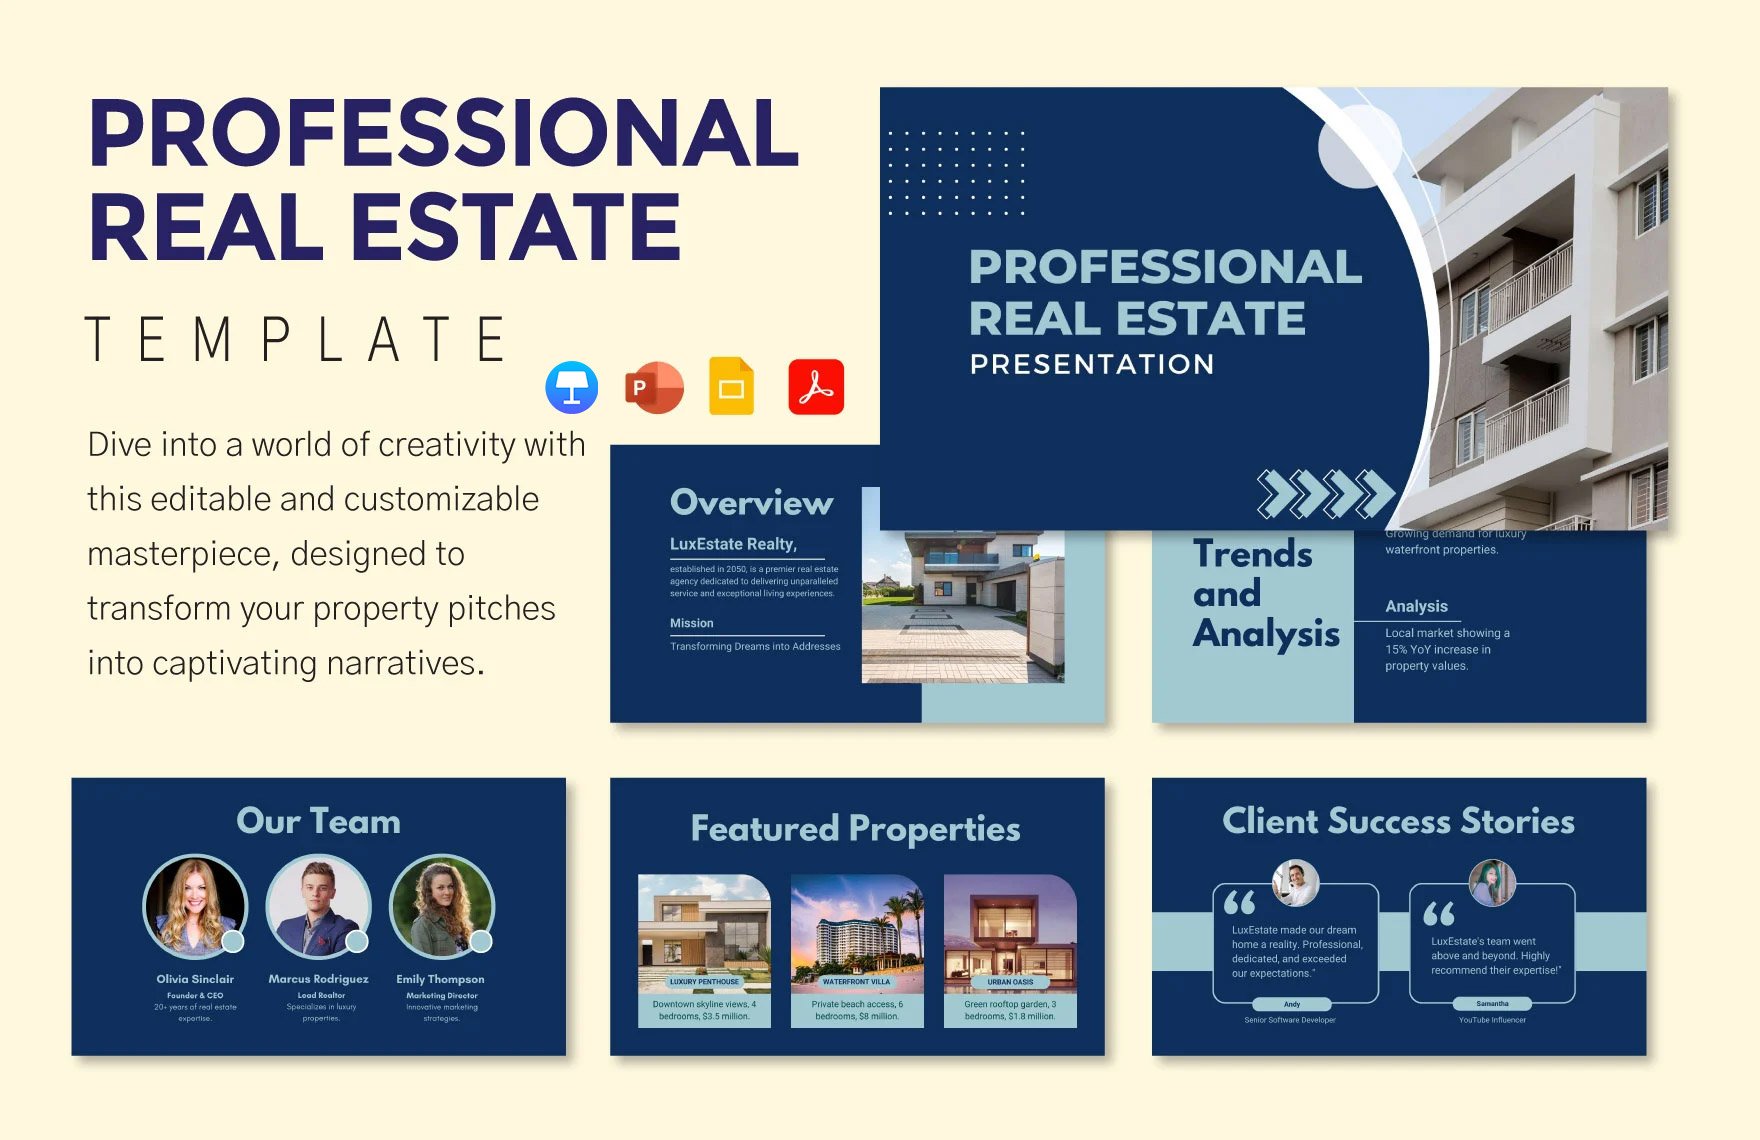 Professional Real Estate Template